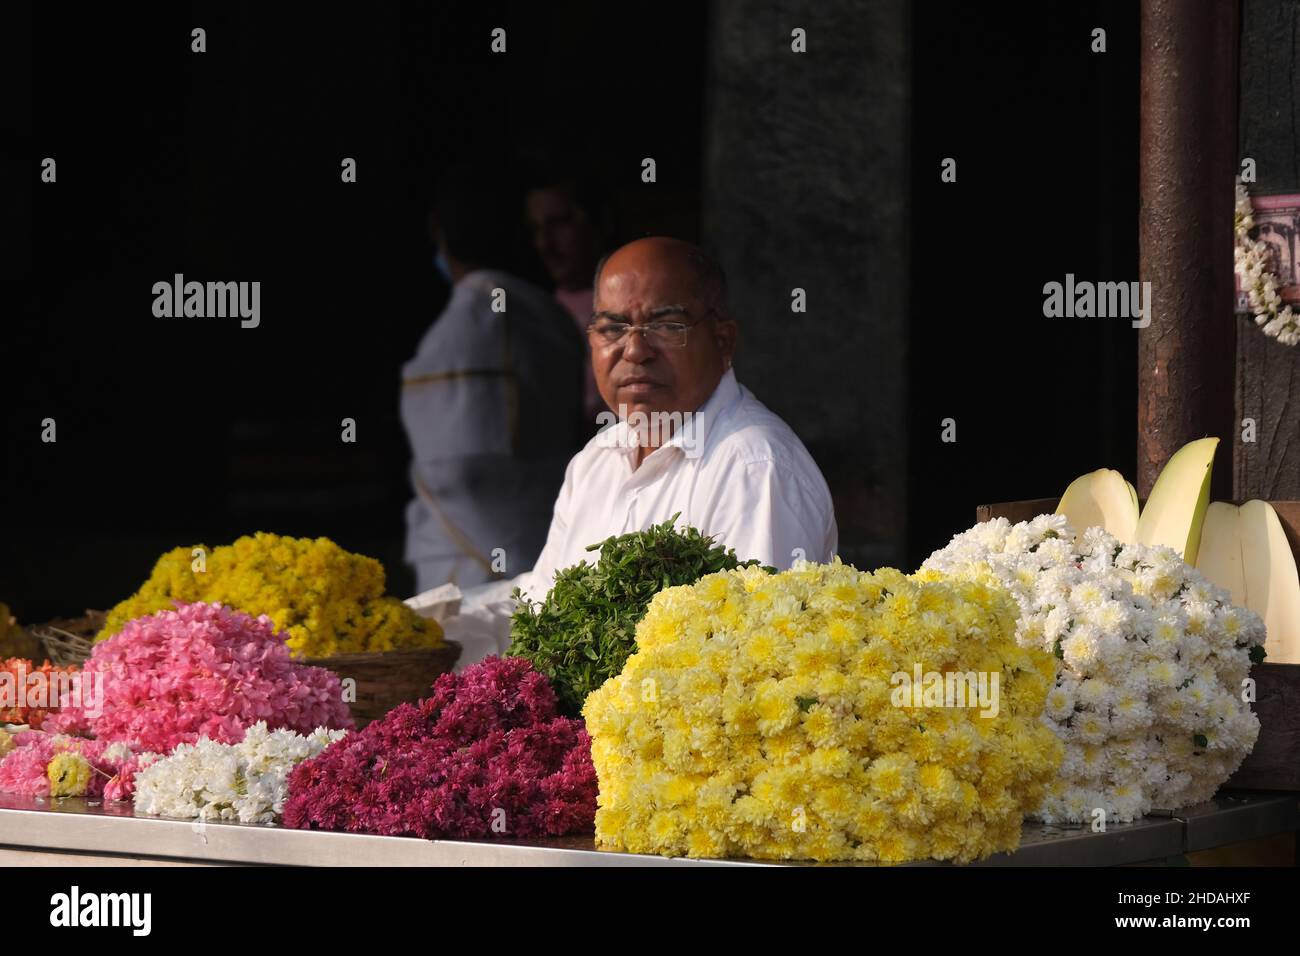 December 20, 2021, Colorful garlands flower selling in the market stalls in Karnataka, India, These flowers are used for wedding decorations, temple c Stock Photo